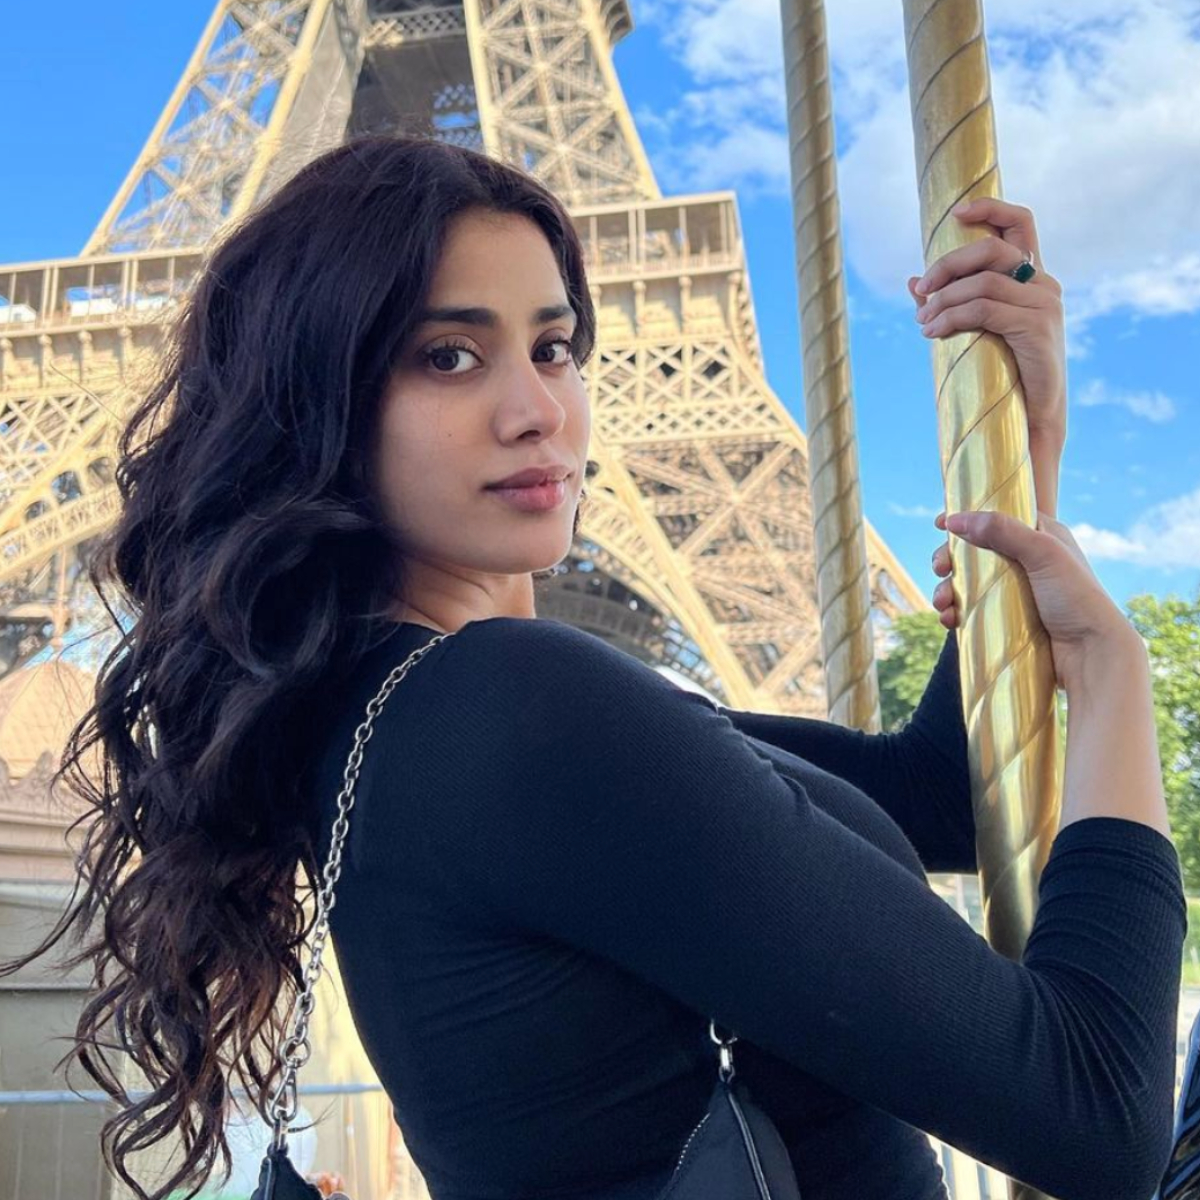 When in Paris! Celebs Pose With the Eiffel Tower - Suzy Byrne